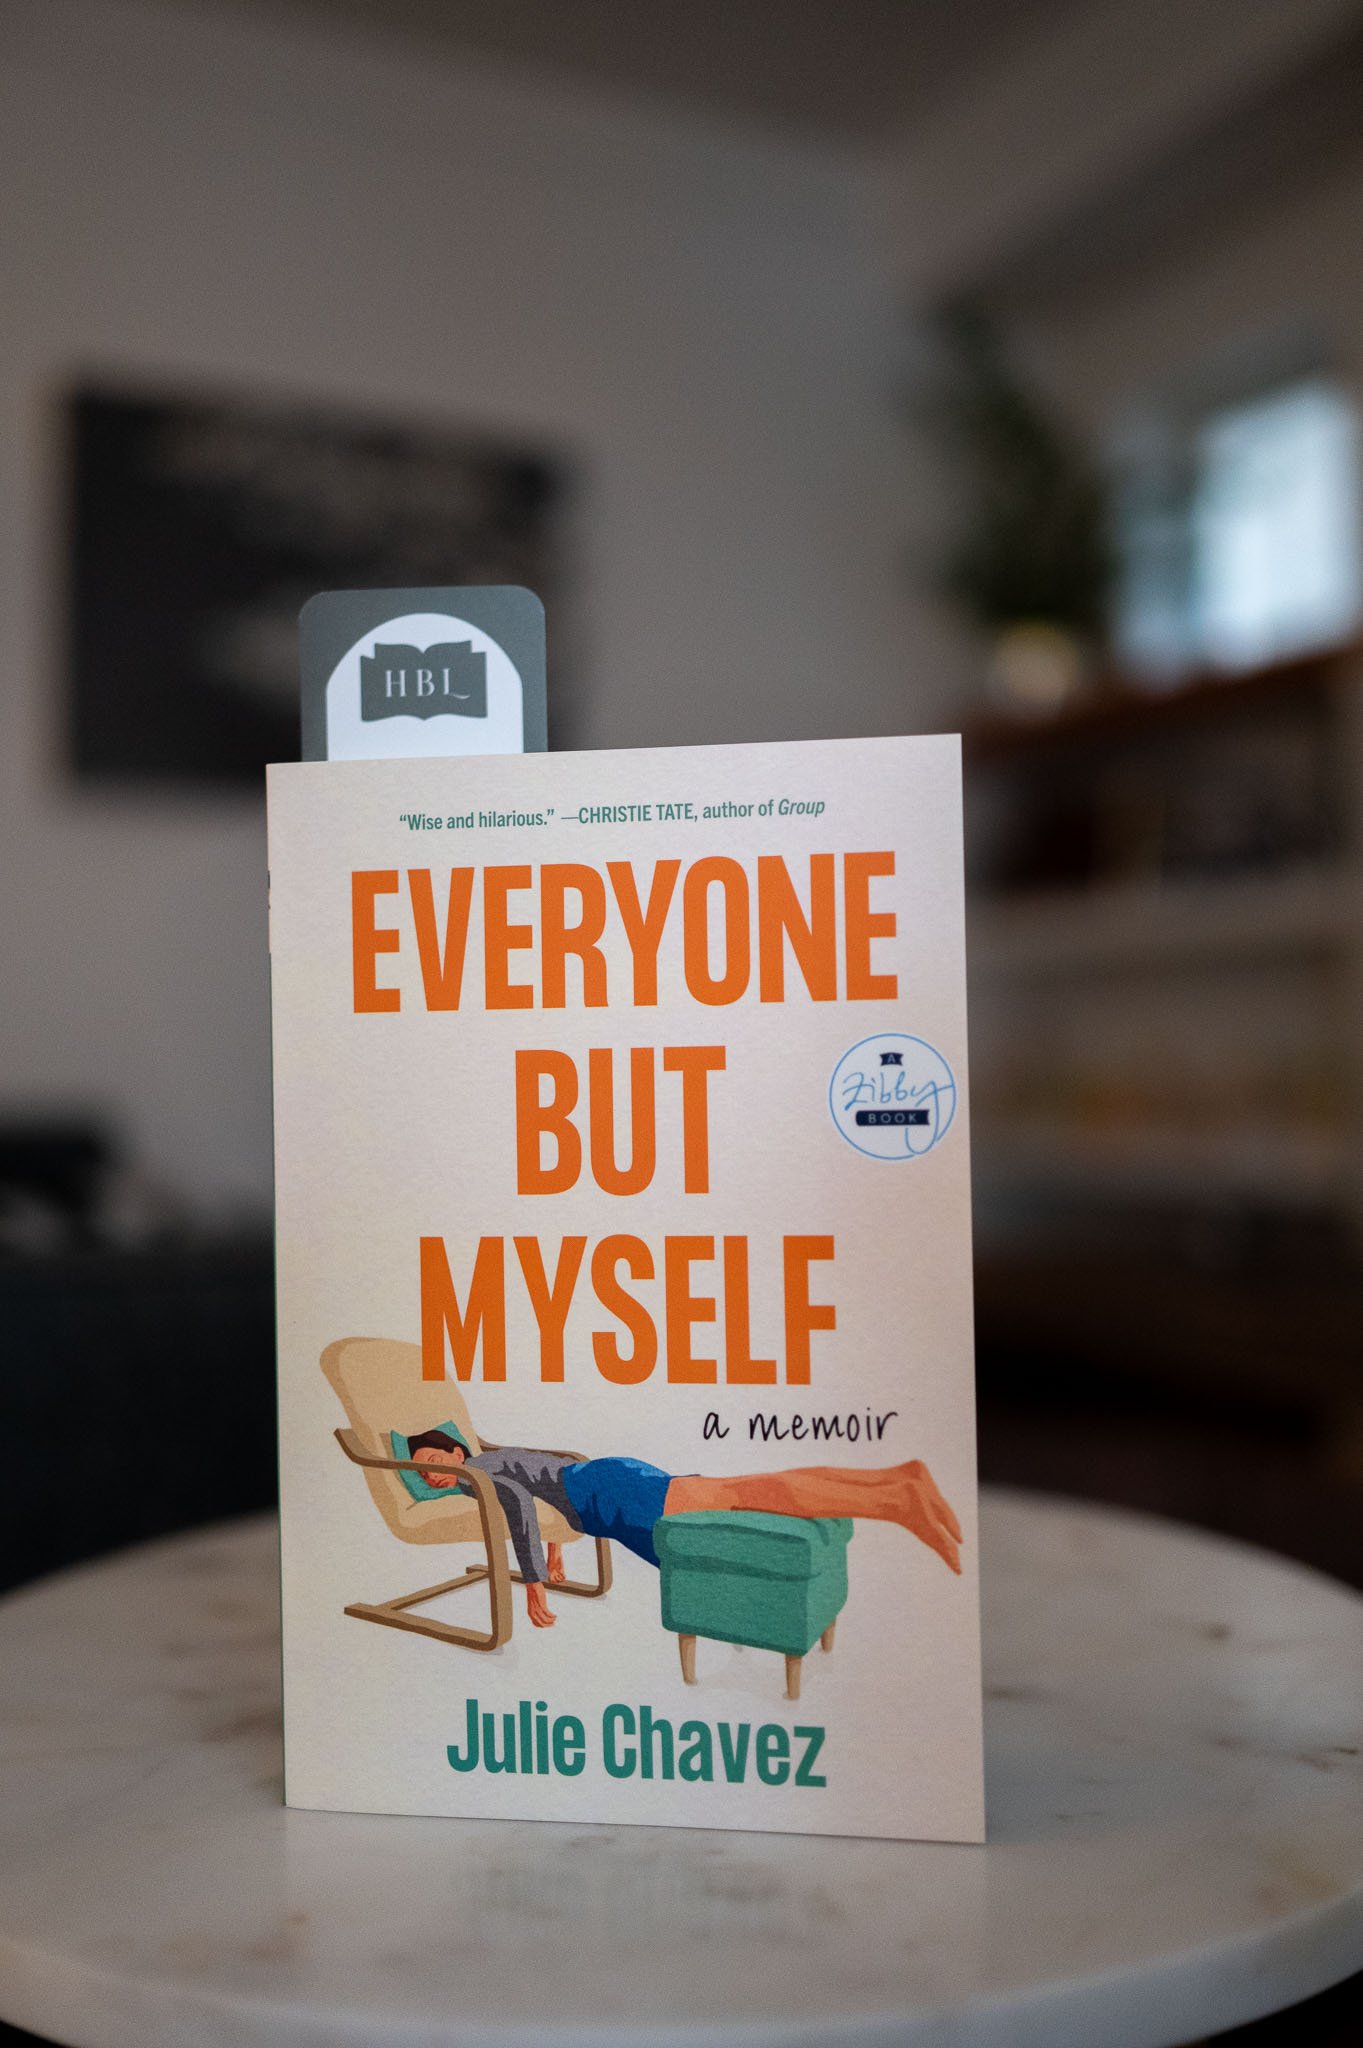 Everyone but Myself by Julie Chavez